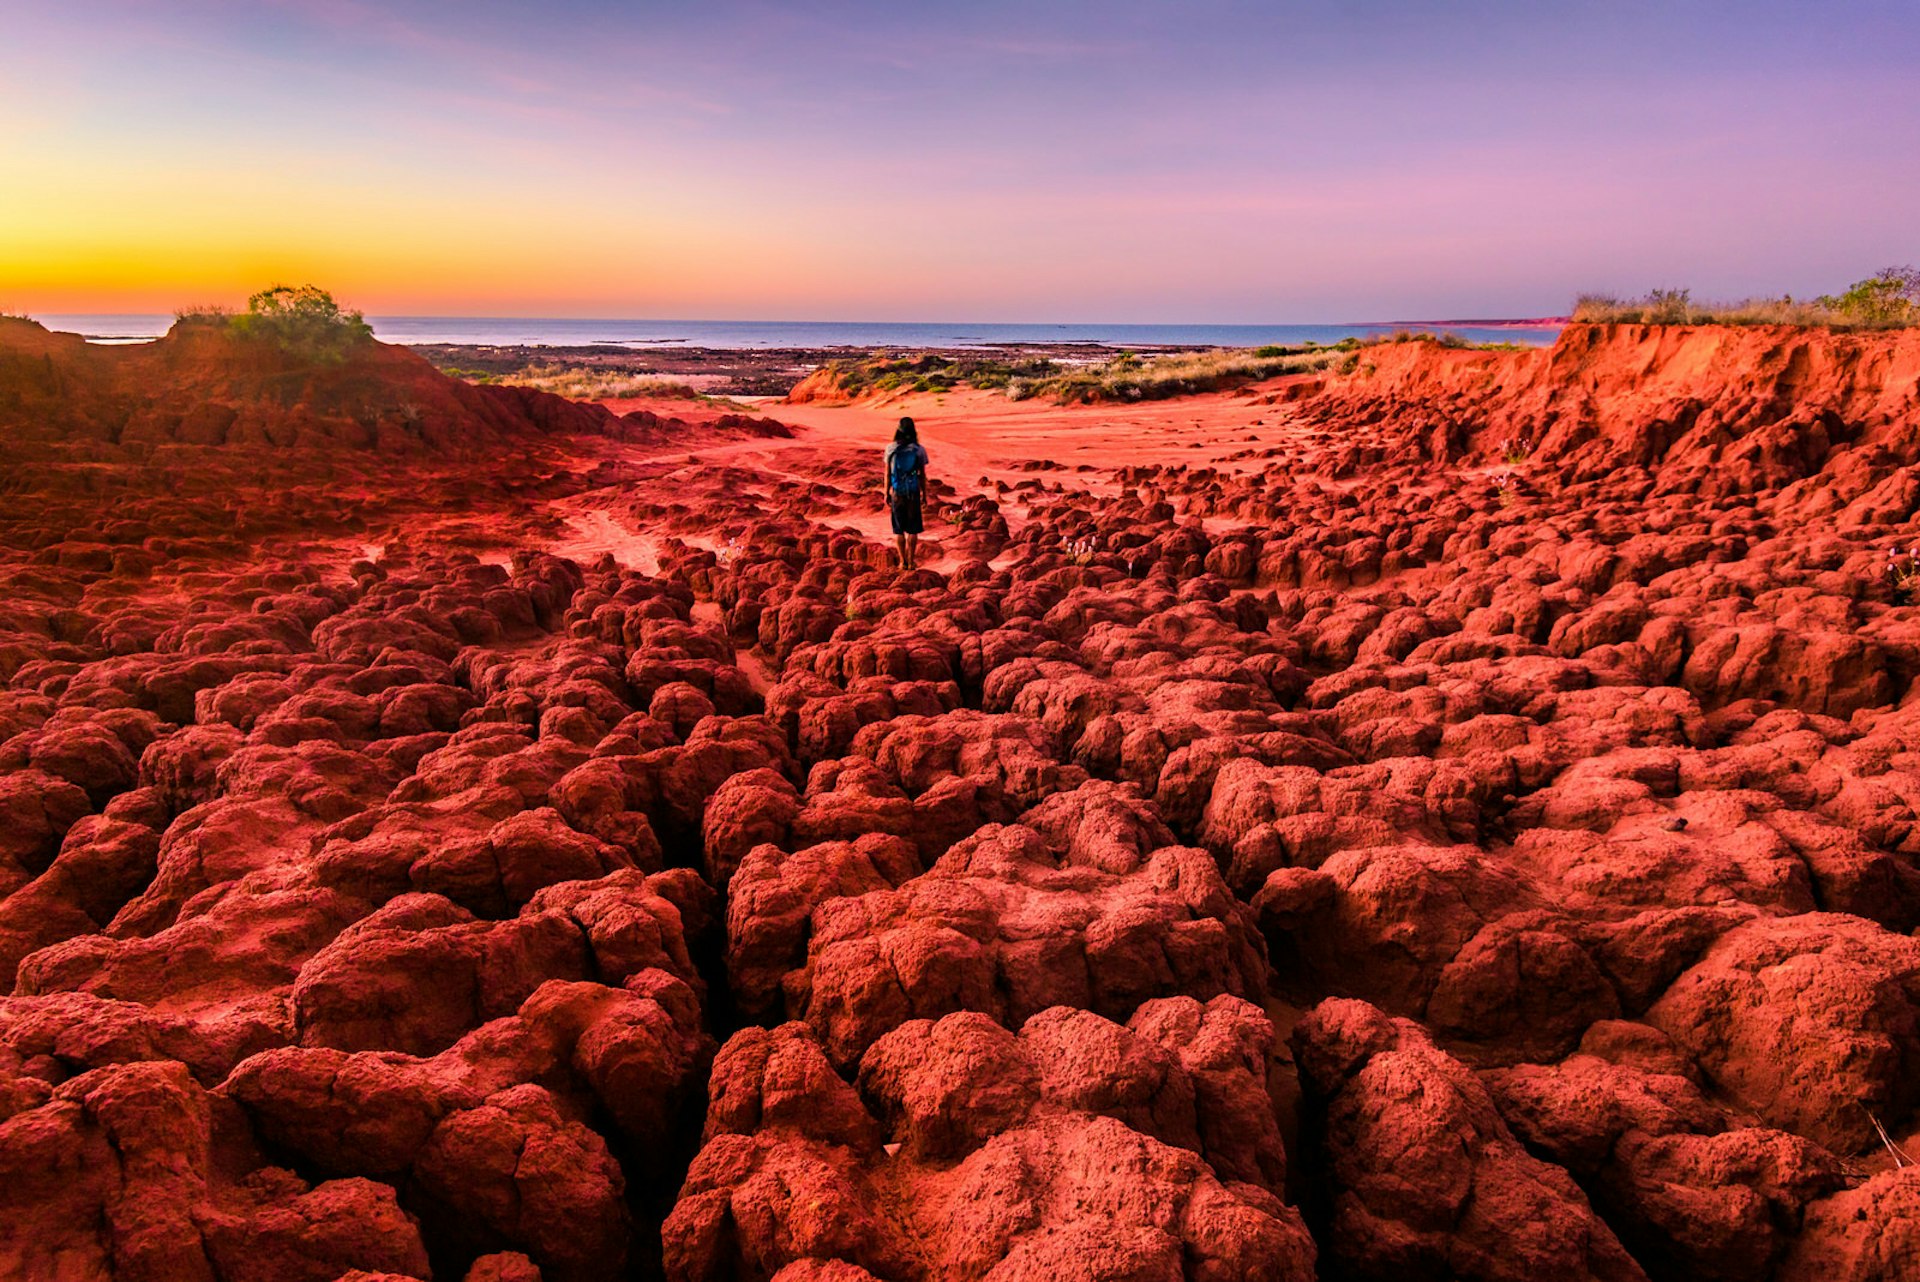 A woman looks out at the sunset from the red pindan soils of James Price Point at Dampier Peninsula. Western Australia